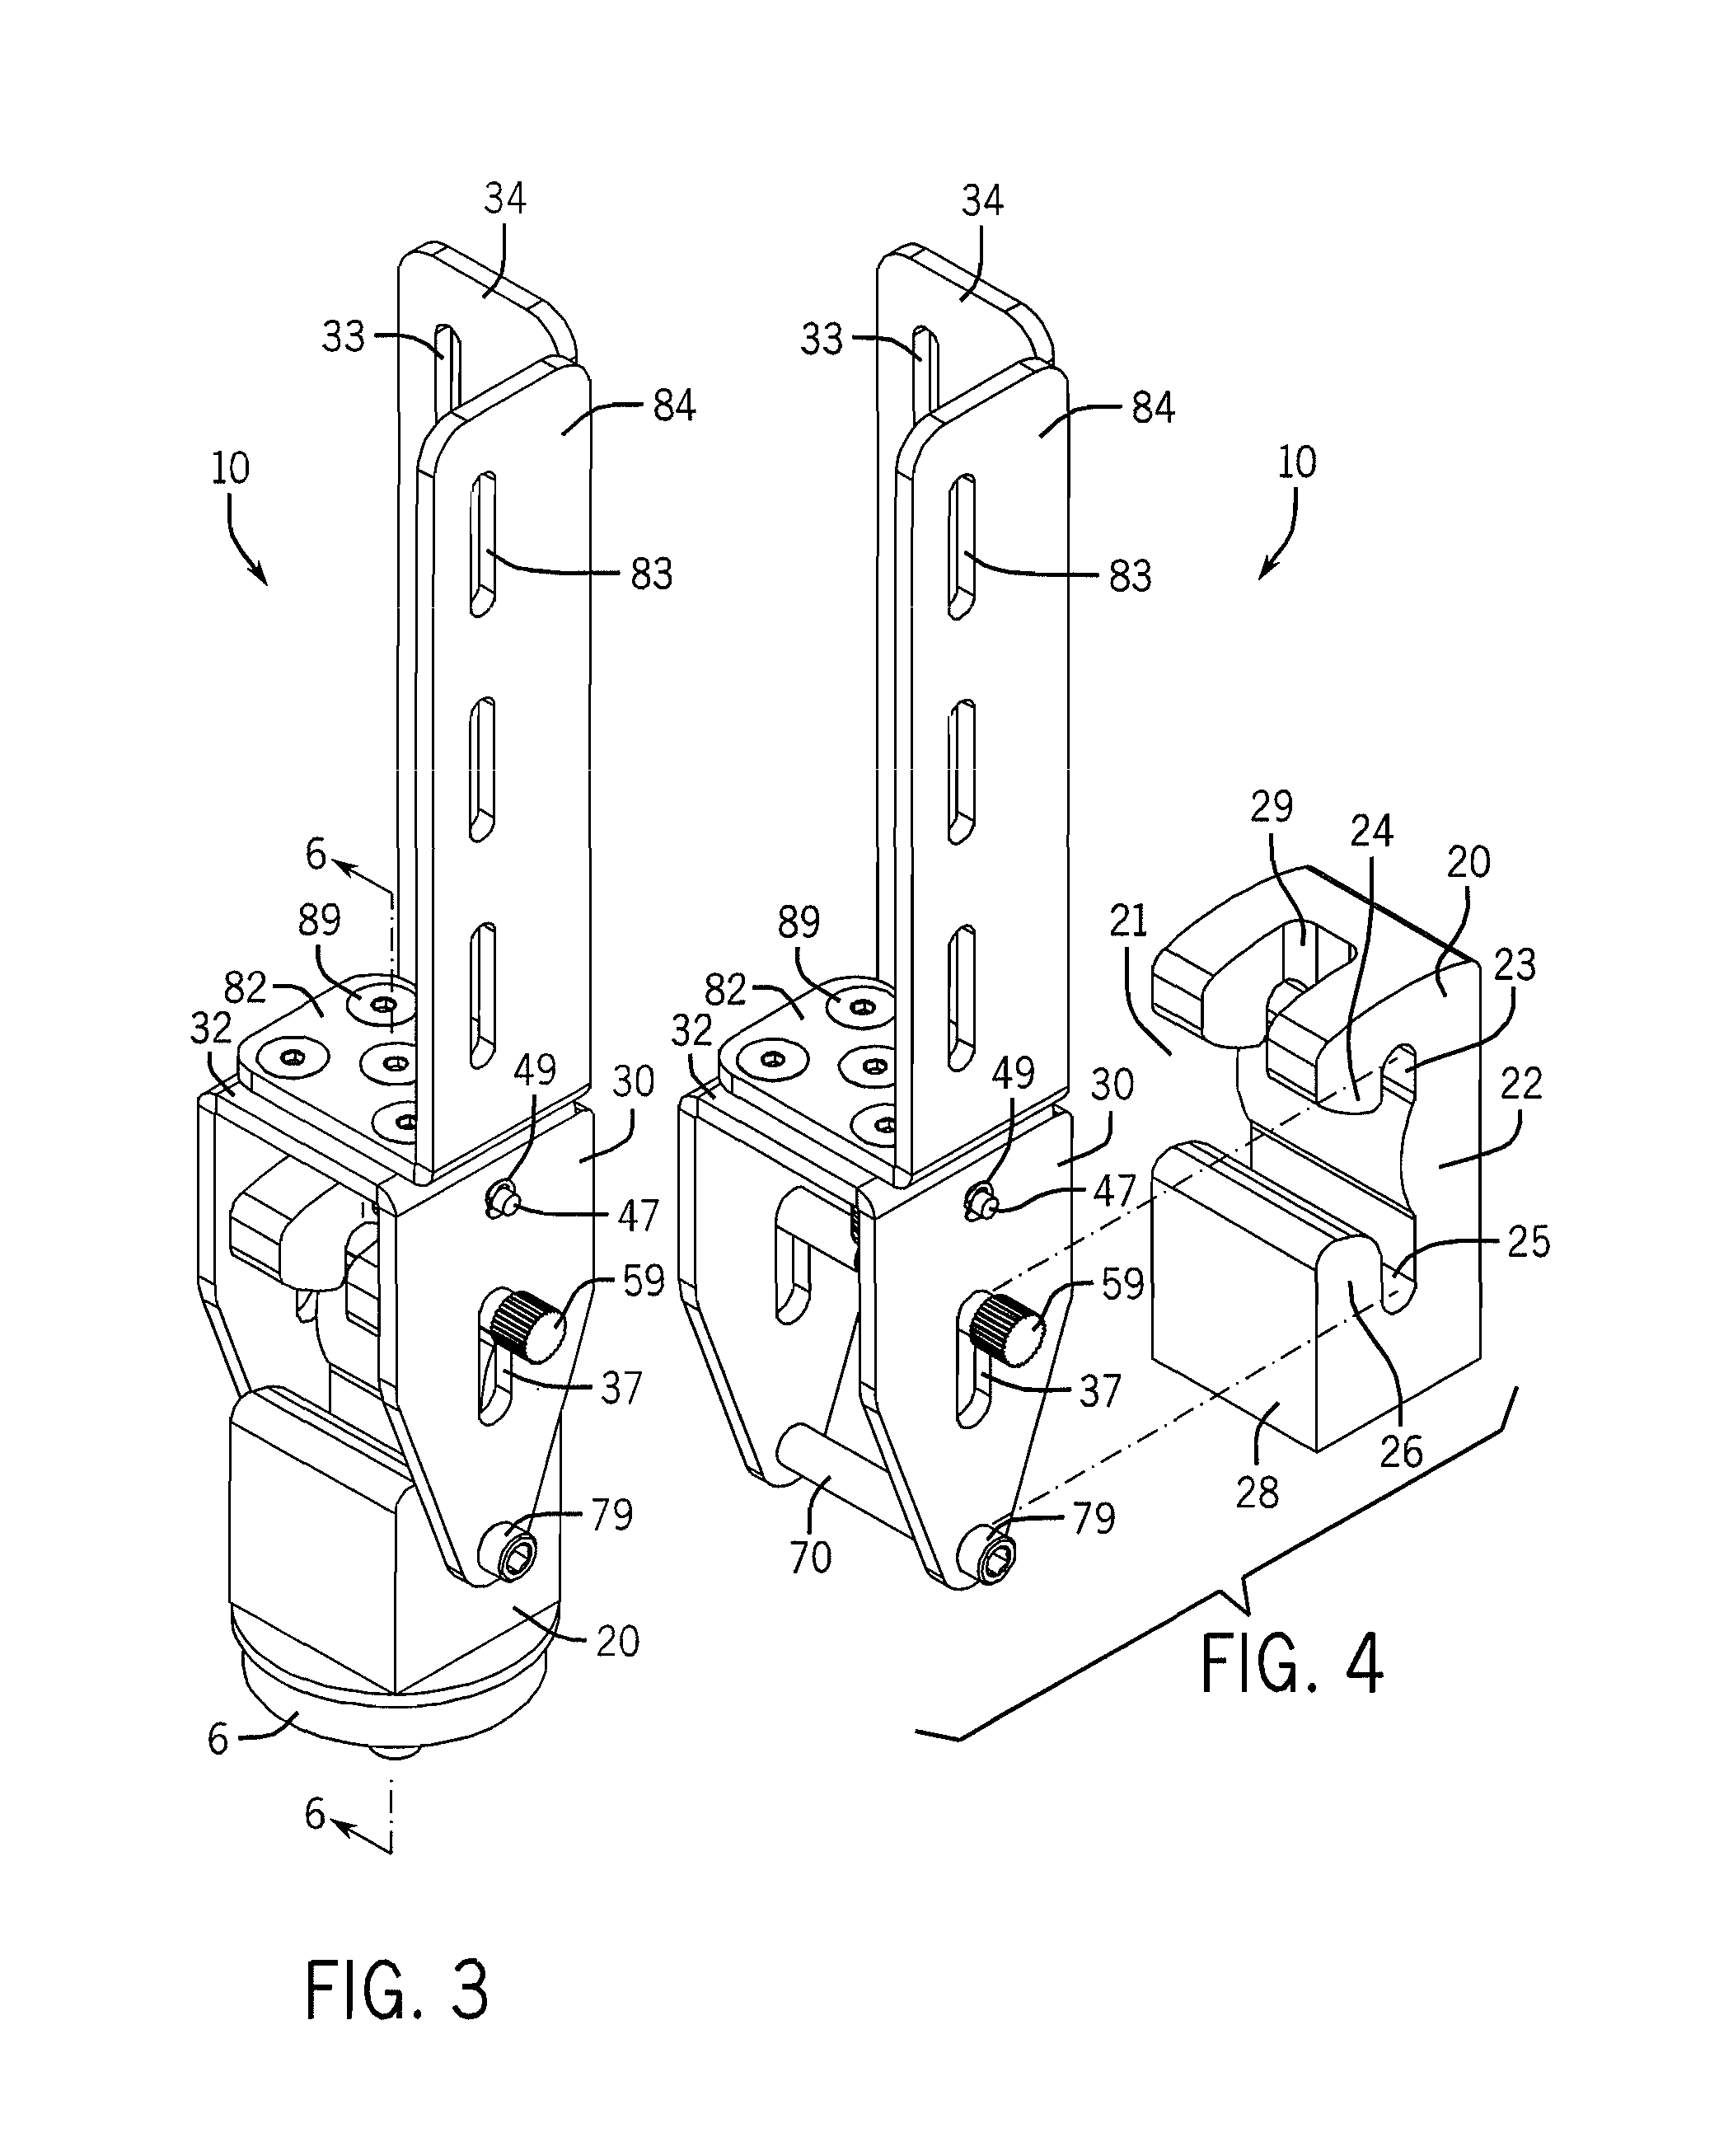 Saddle coupling and saddle base assembly for use with power hand tools